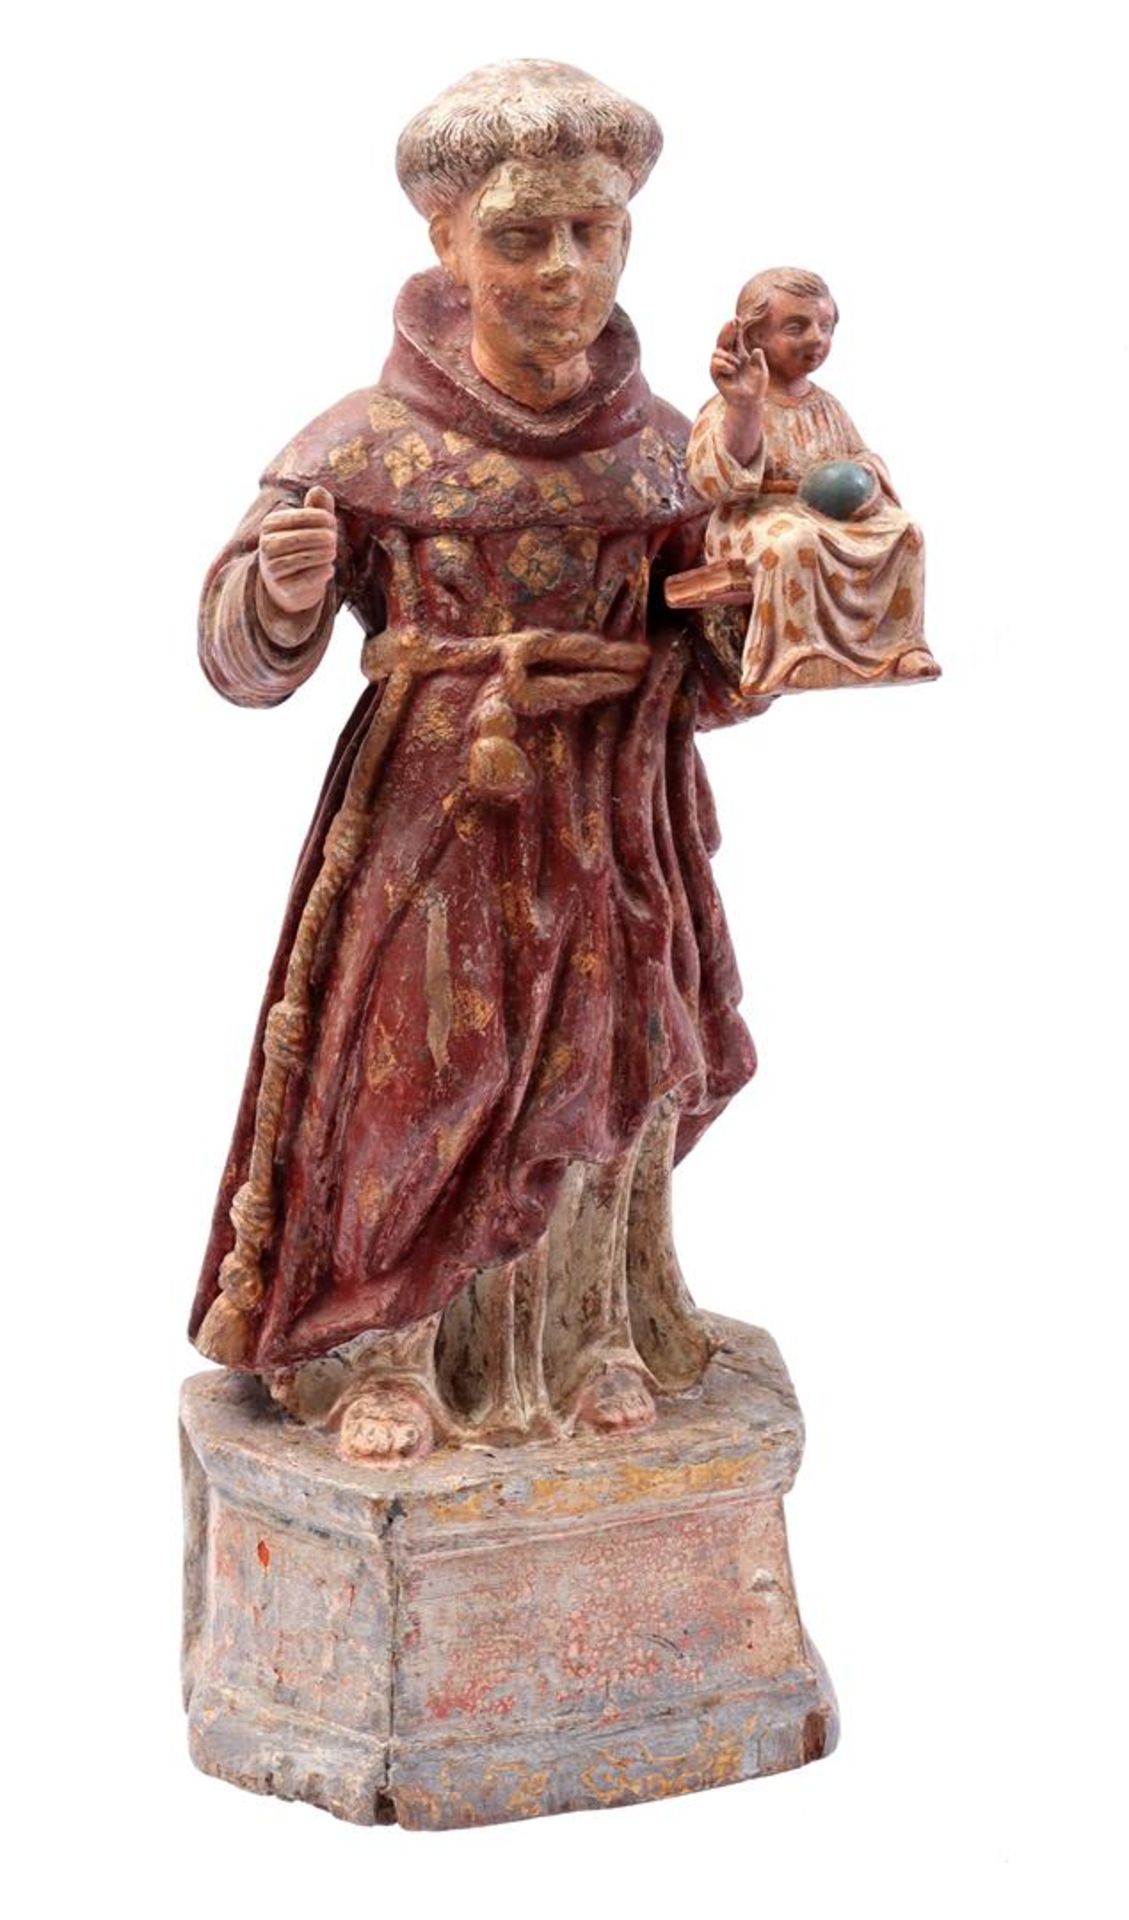 Wooden polychrome statue